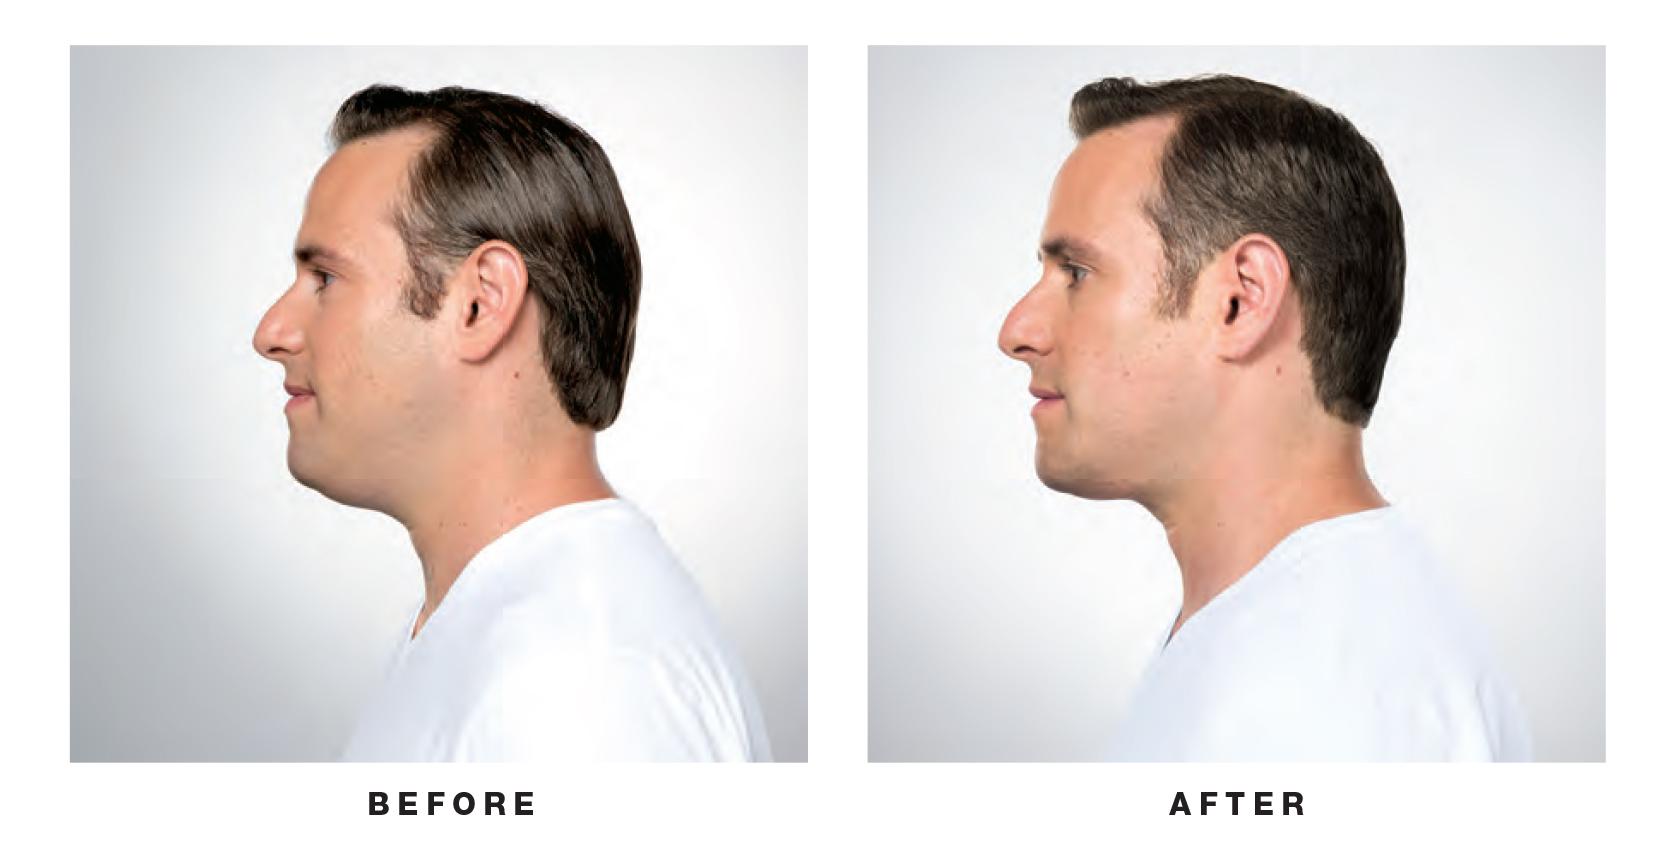 Sculpting the male jawline: Chin and neck contouring 101